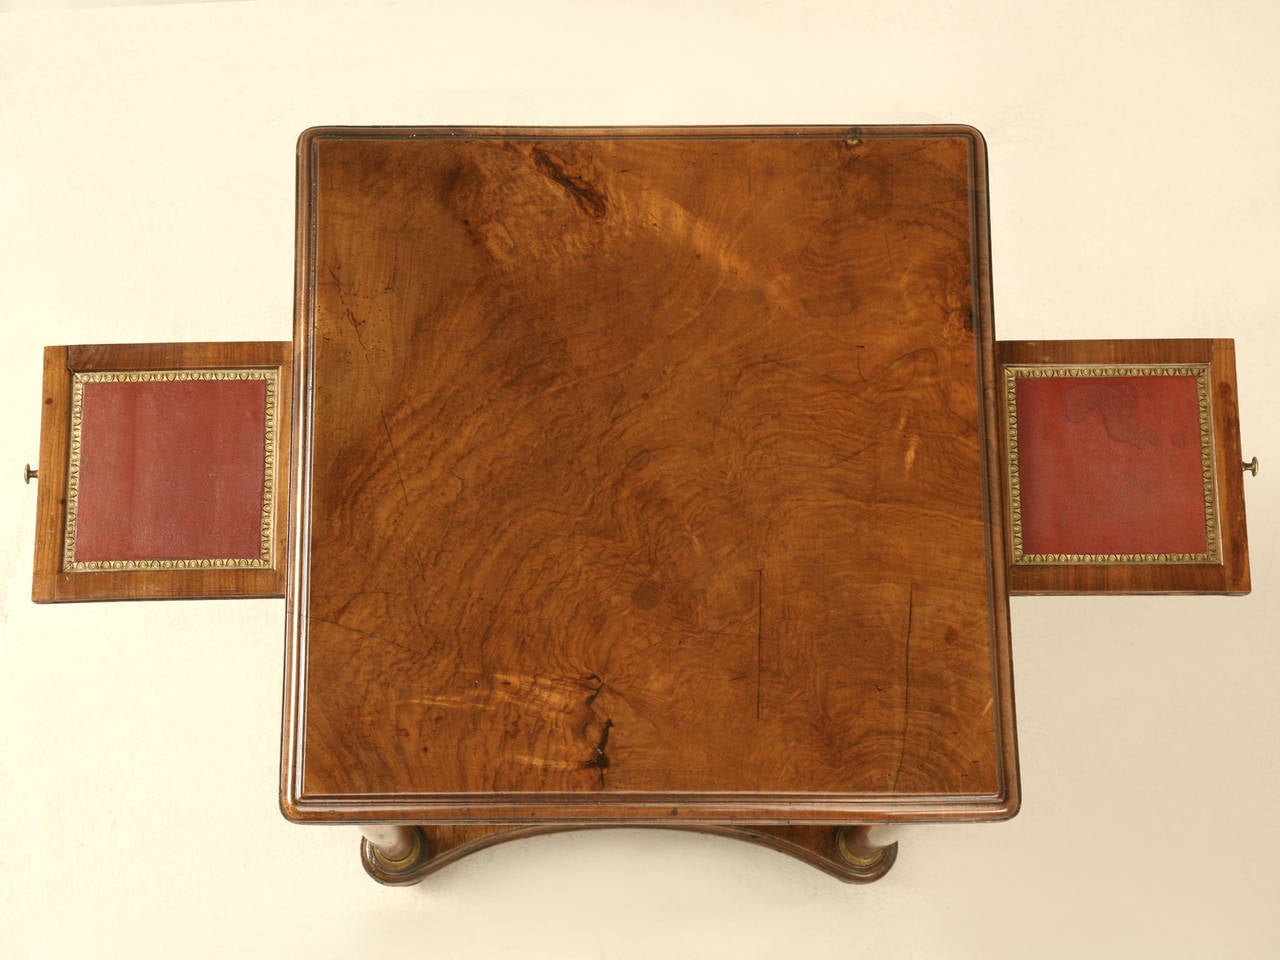 Elegant antique Empire style end table in an ever so slightly sun bleached walnut, which produced the warmest brown tones I have ever seen. The tabletop is one piece of wood and has been French polished to a high gloss, but we did not disturb the